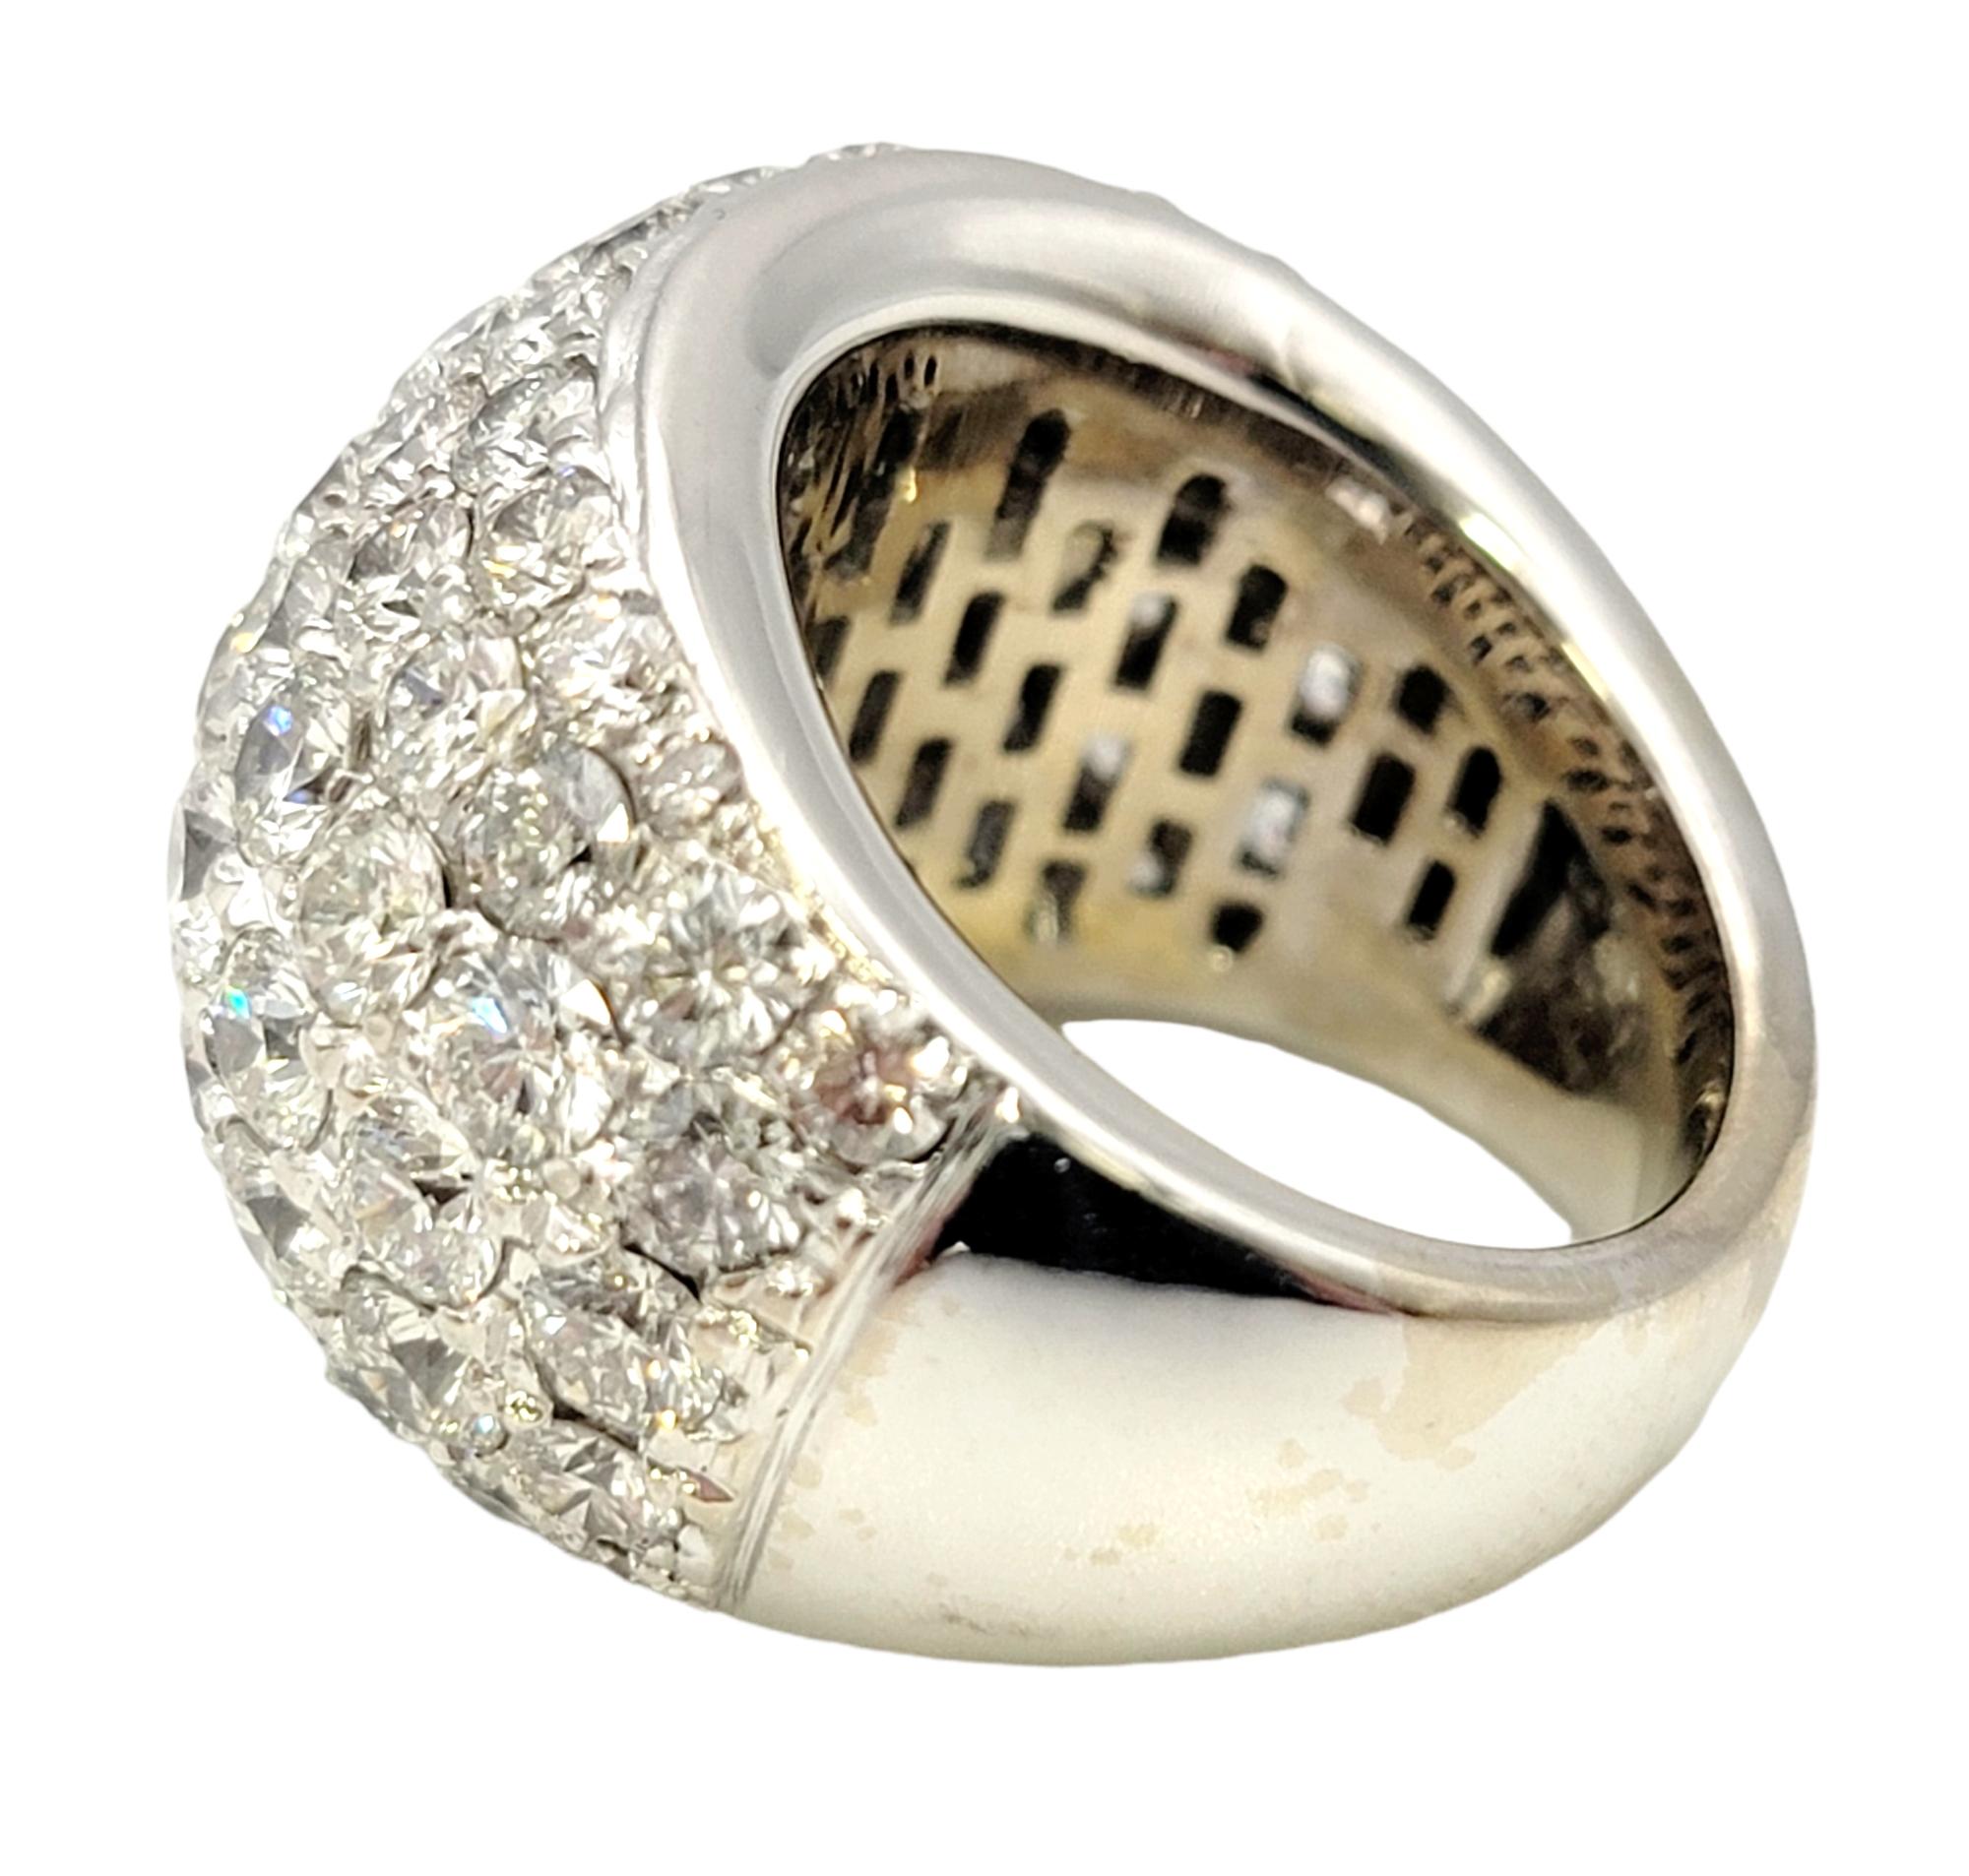 Contemporary Huge Round Pave Diamond Dome Lollipop Ring in 14 Karat White Gold 9 Carats Total For Sale